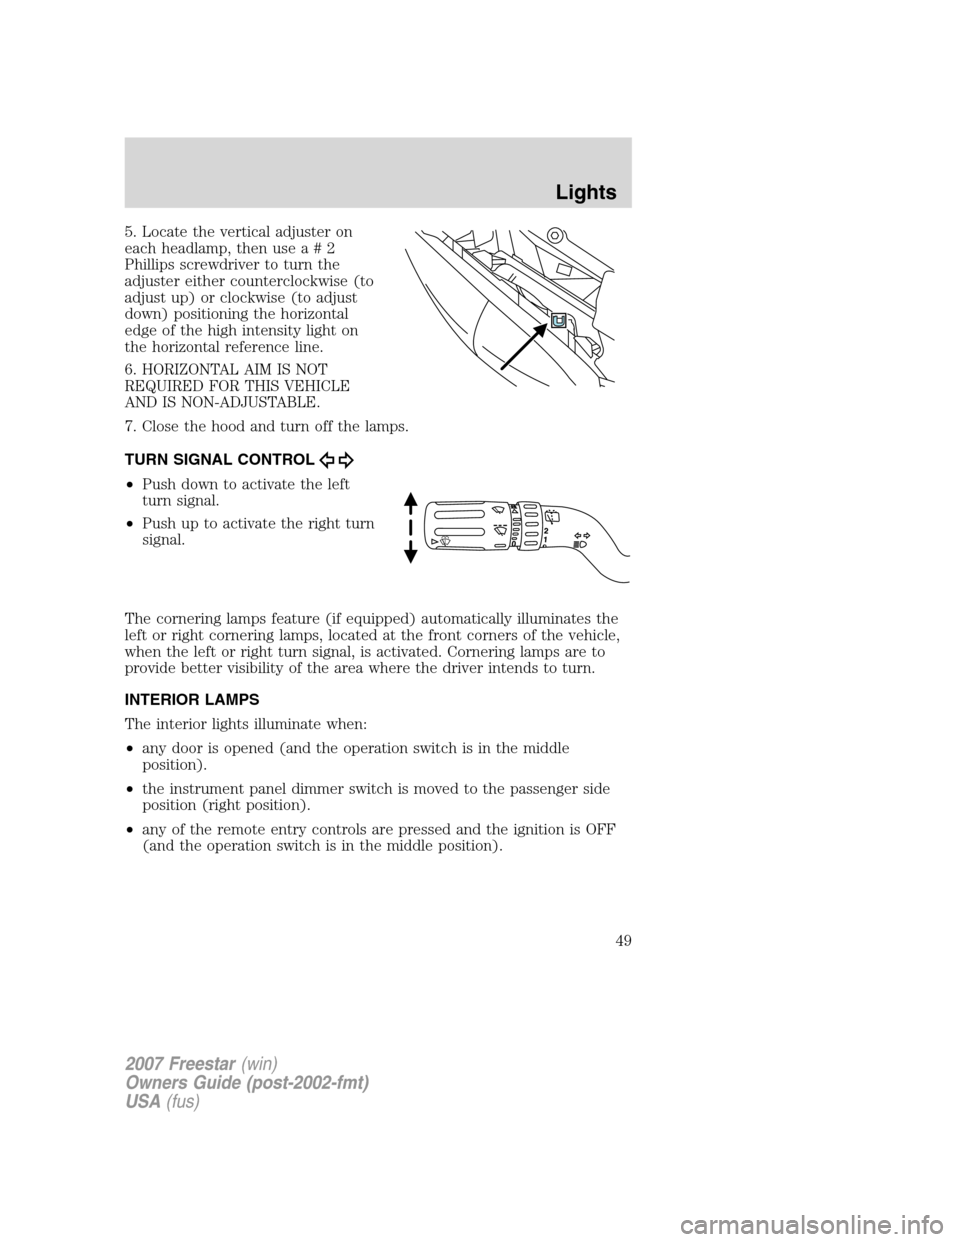 FORD FREESTAR 2007 1.G Owners Manual 5. Locate the vertical adjuster on
each headlamp, then usea#2
Phillips screwdriver to turn the
adjuster either counterclockwise (to
adjust up) or clockwise (to adjust
down) positioning the horizontal
